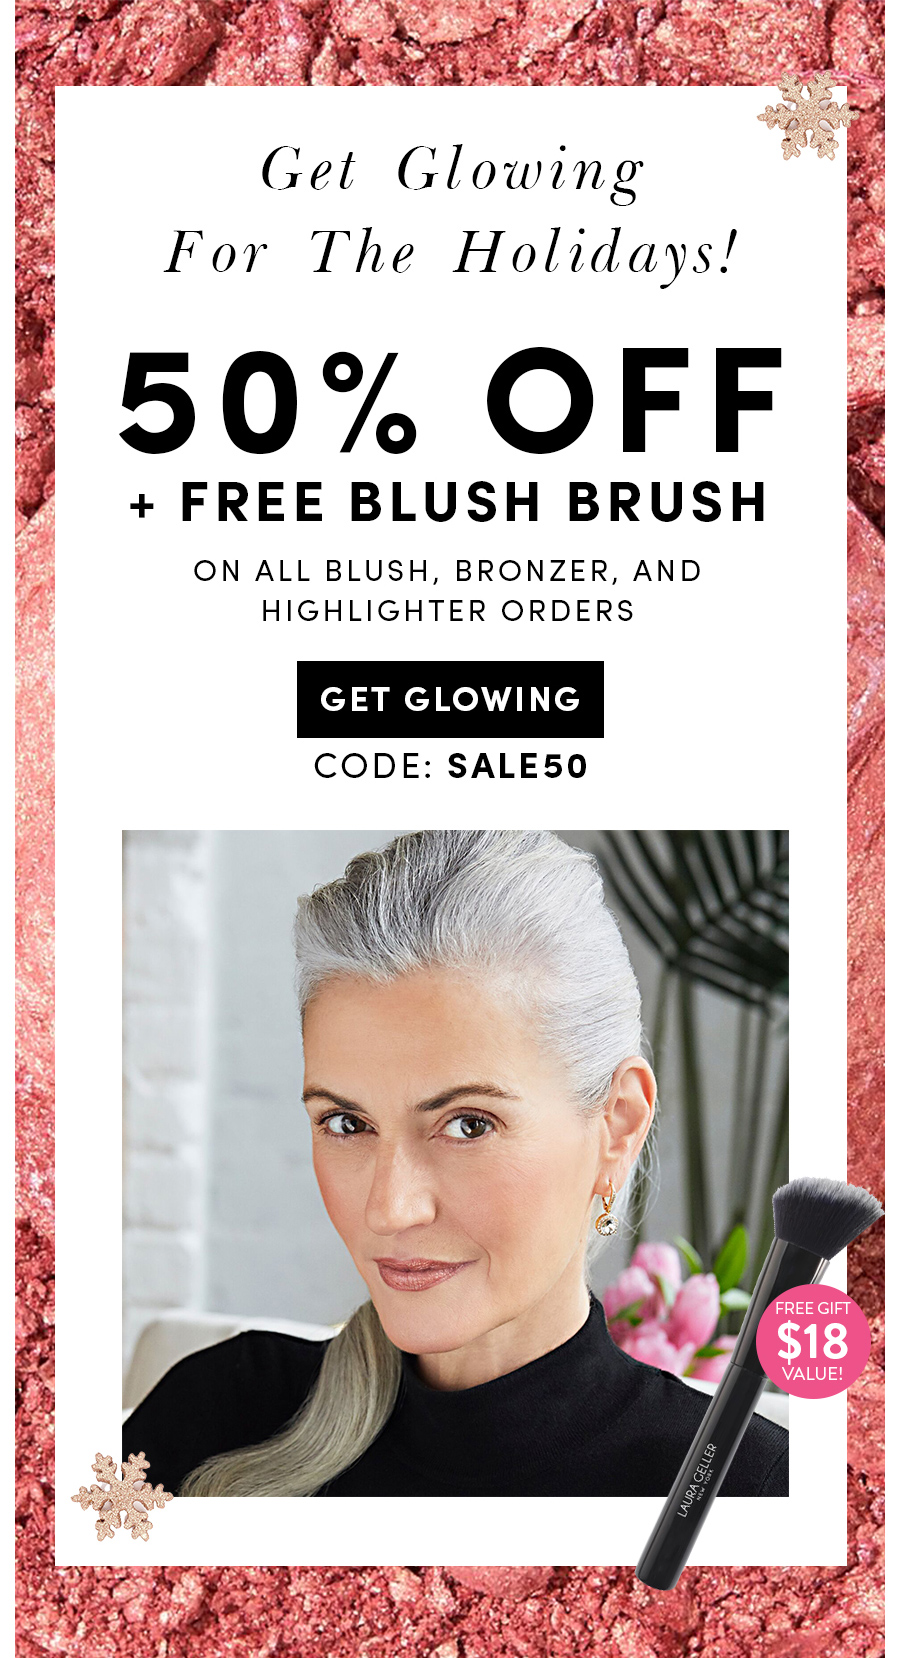 50% OFF + FREE BLUSH BRUSH ON ALL BLUSH, BRONZER, AND HIGHLIGHTER ORDERS | GET GLOWING